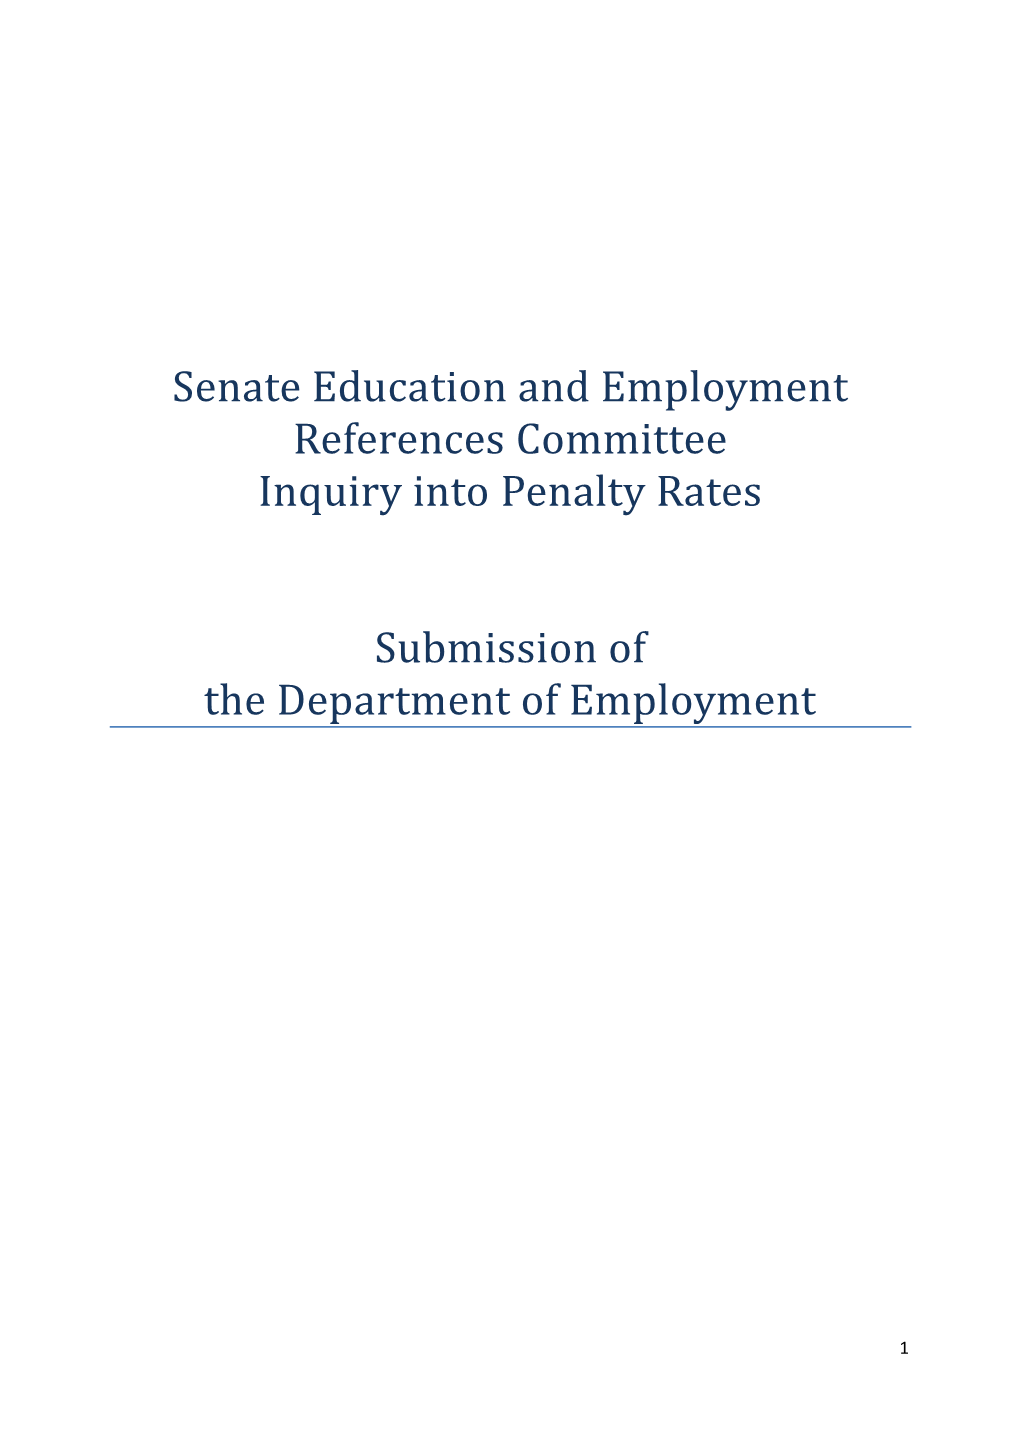 Senate Education and Employment References Committee Inquiry Into Penalty Rates